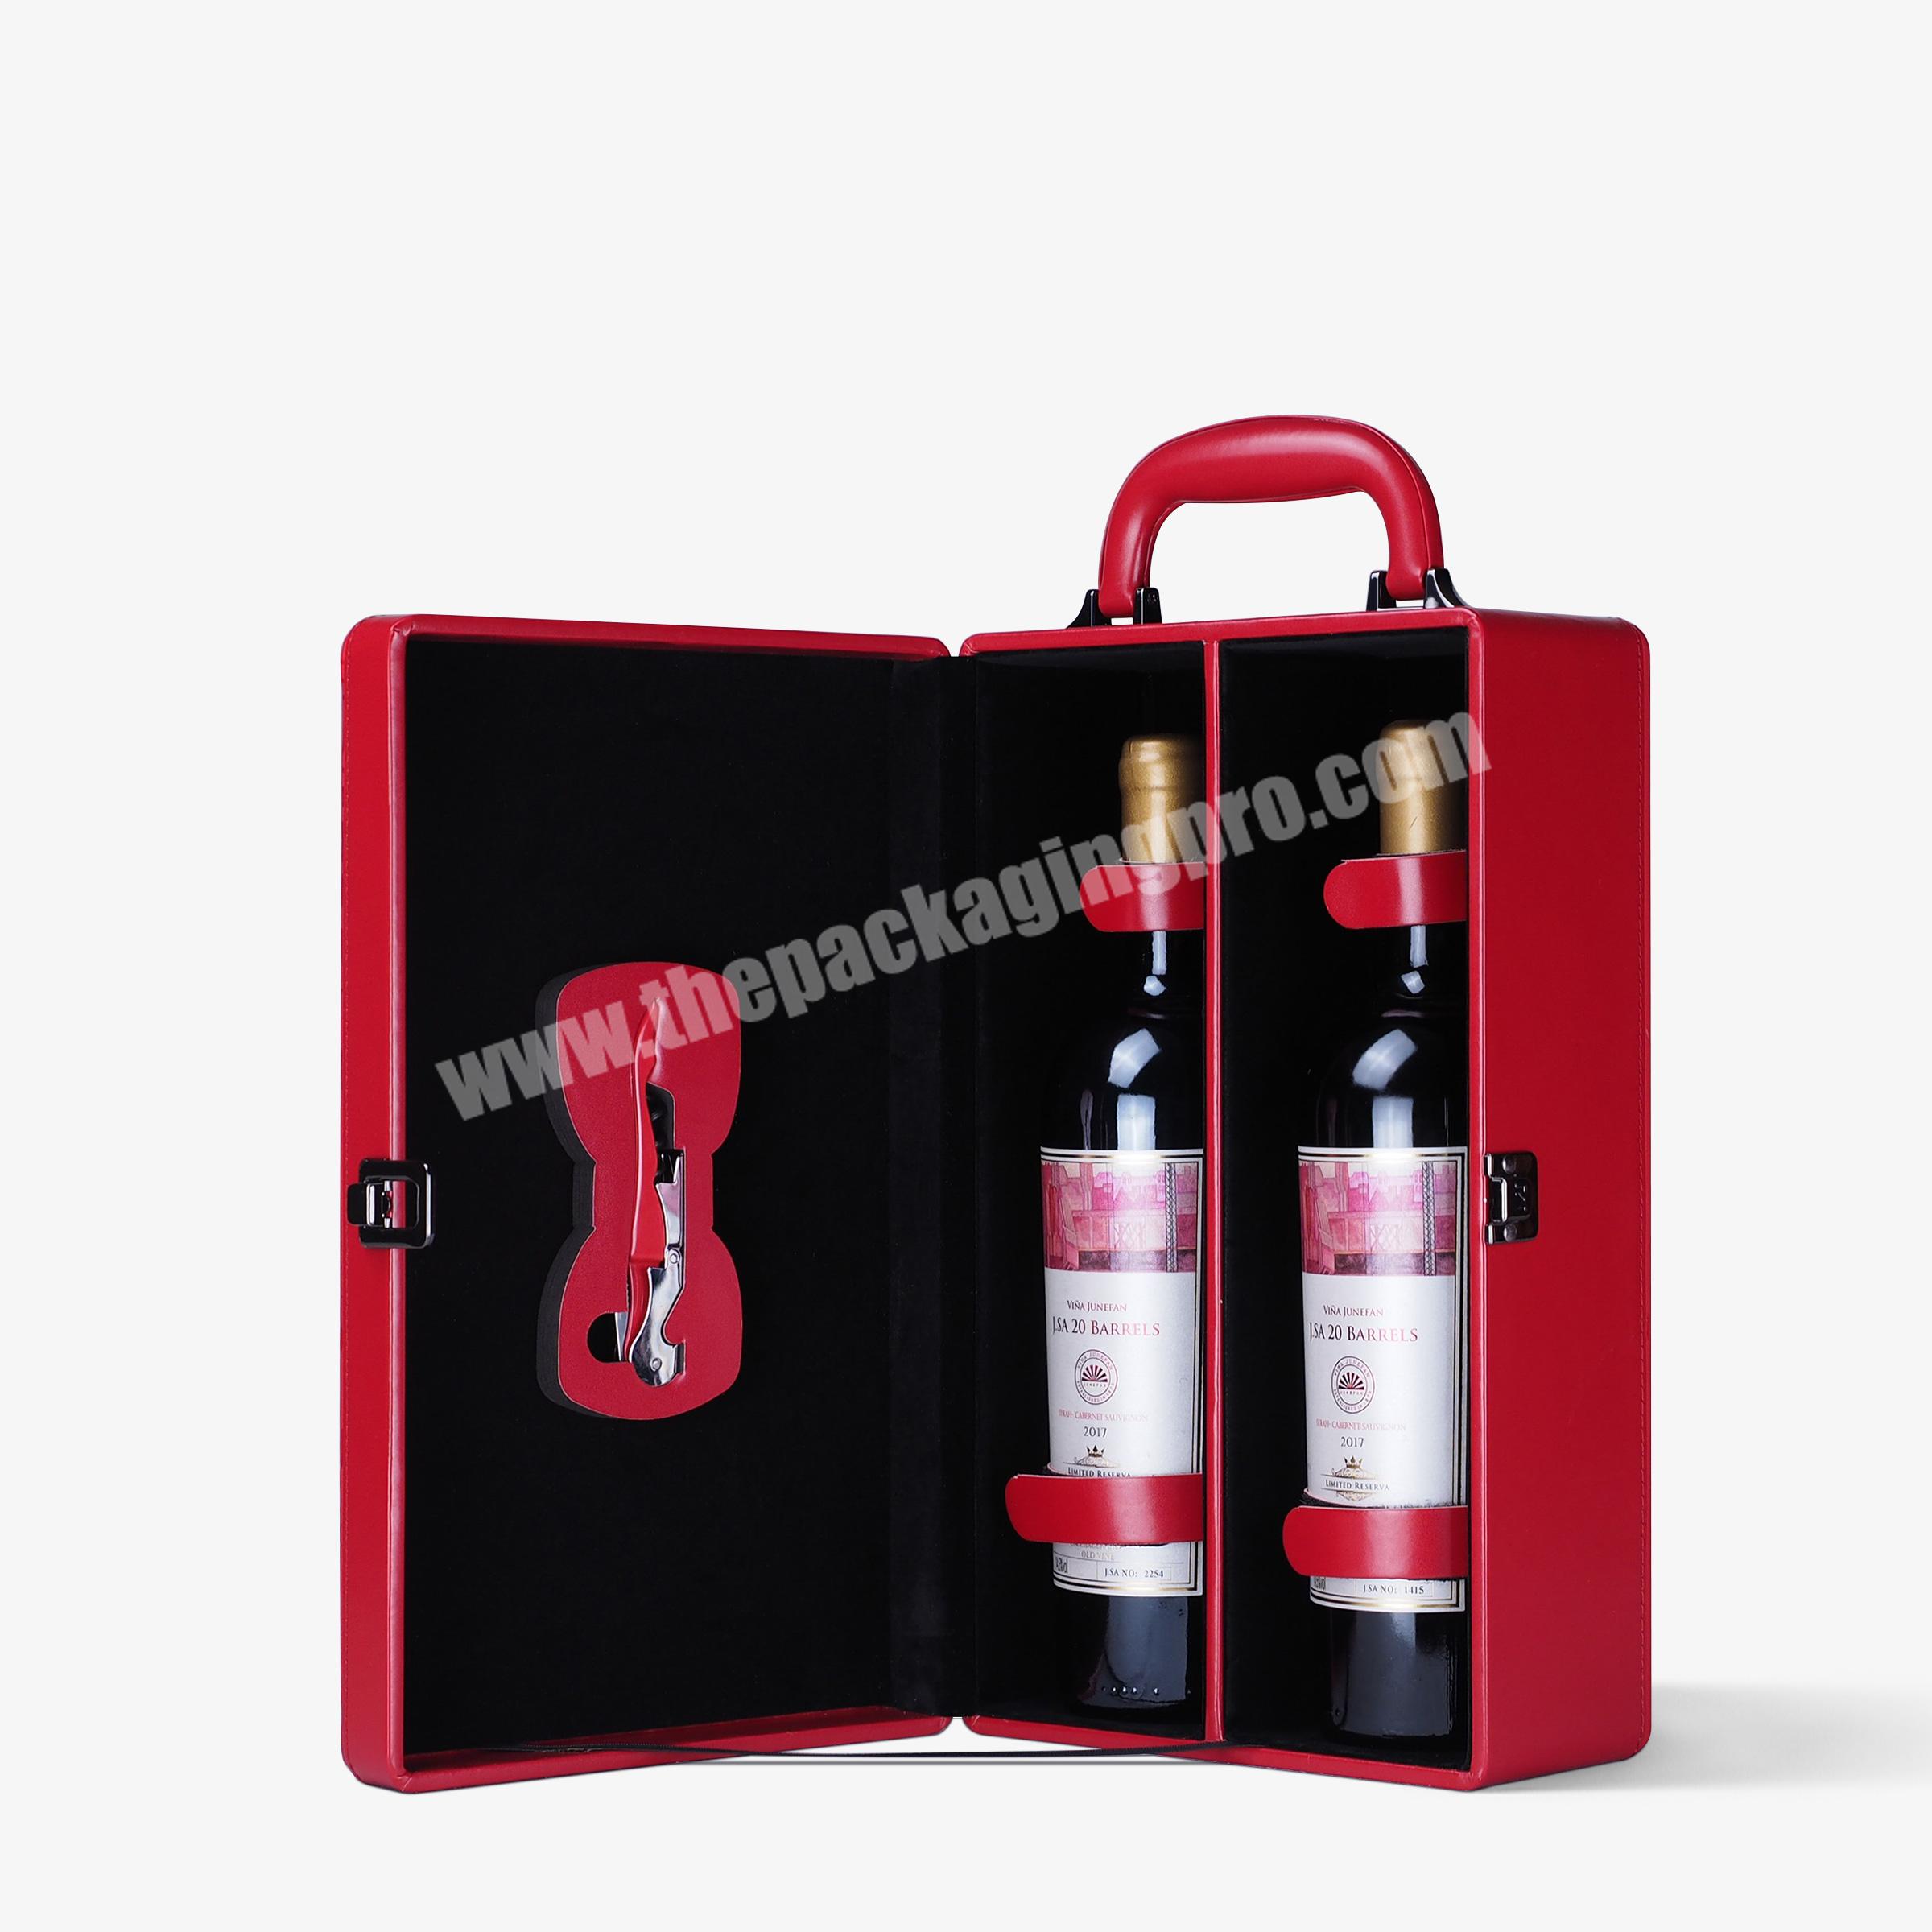 OEM logo red wine gift box wholesale wine boxes hot sale wine gift box packaging